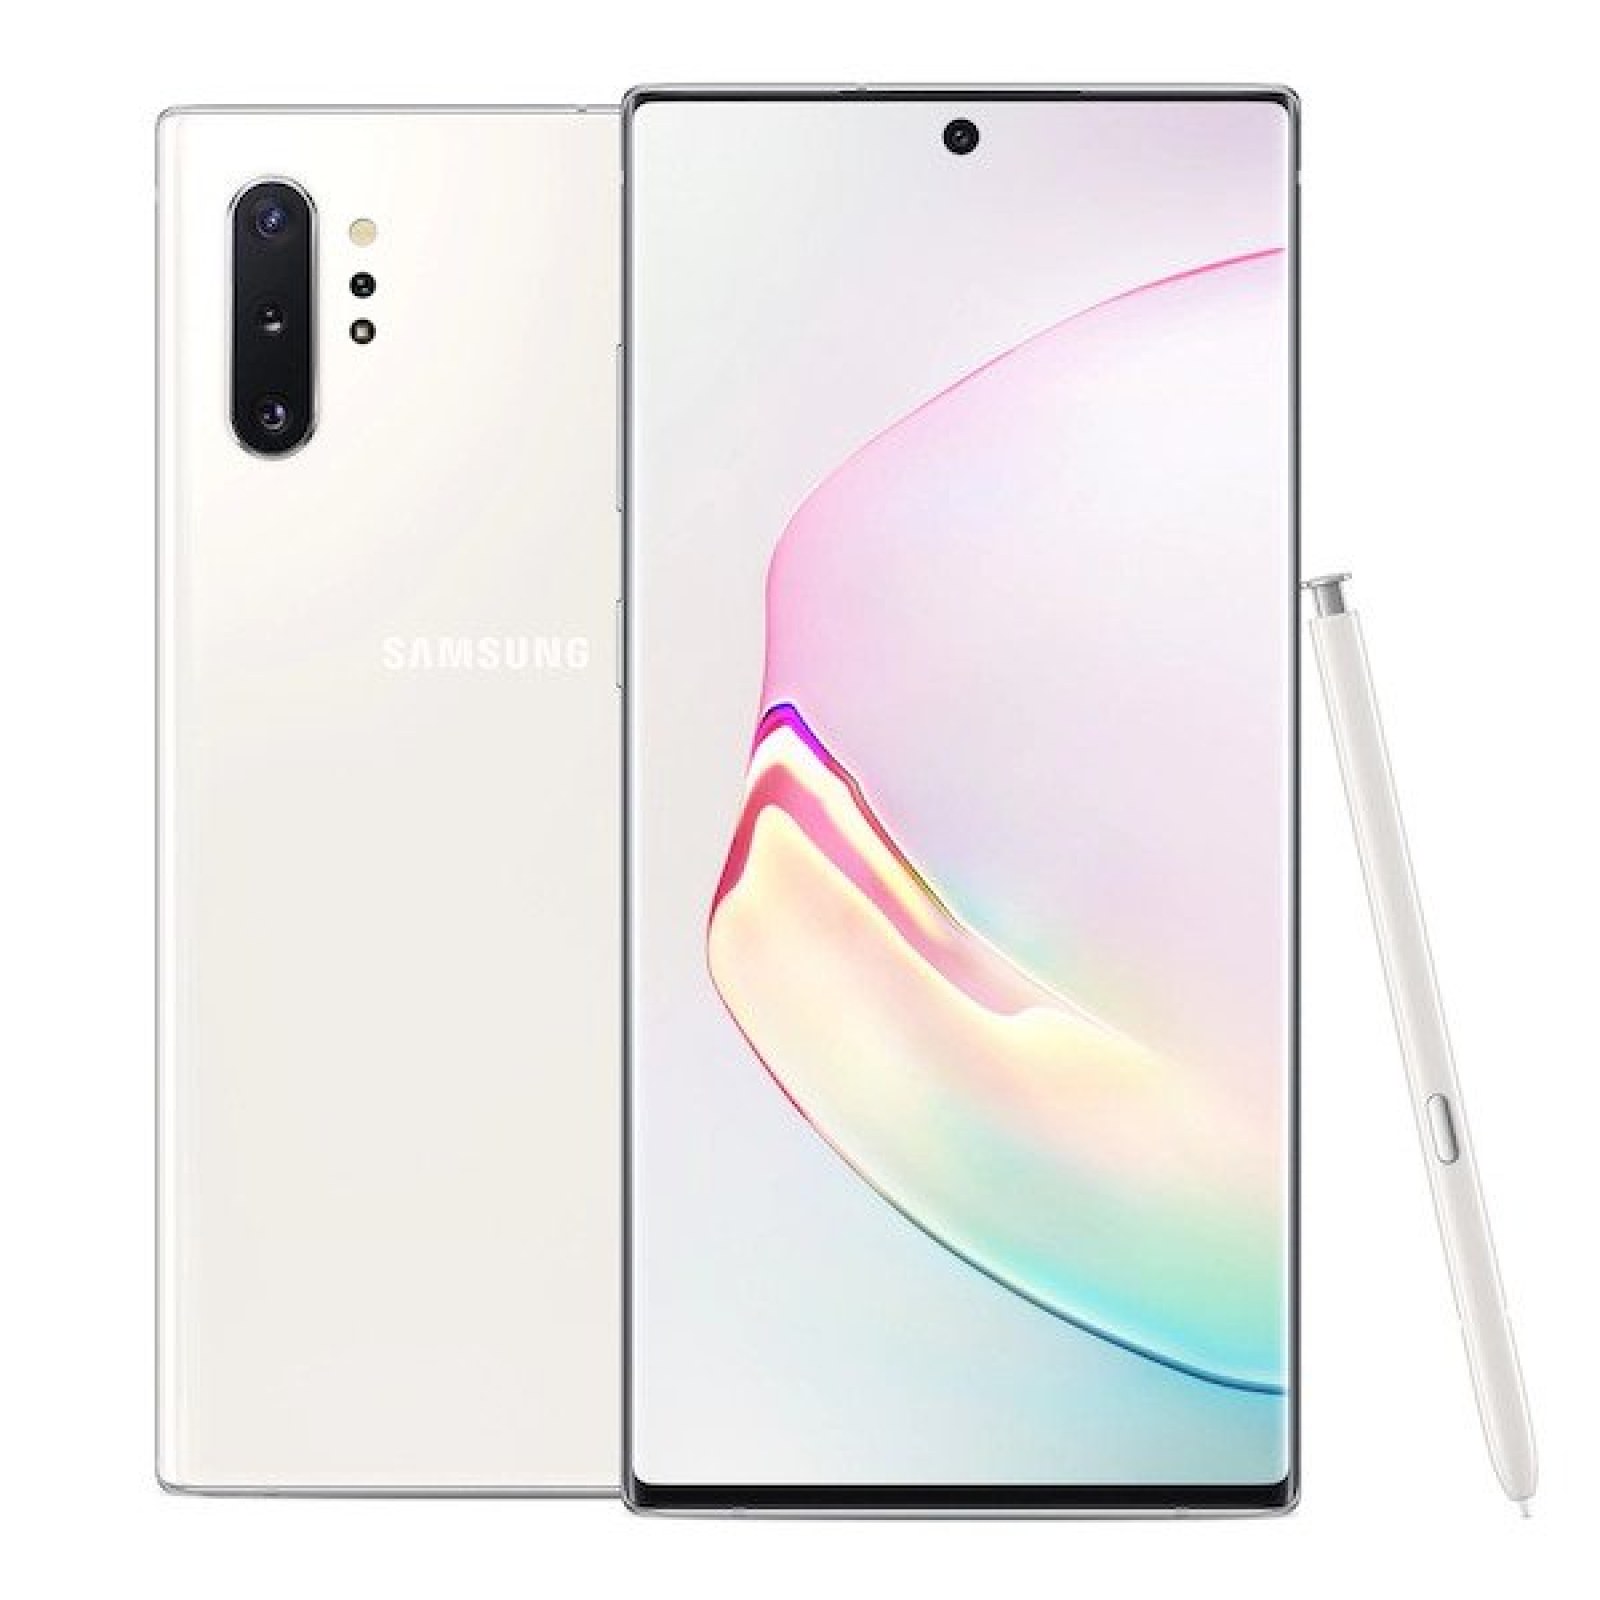 Samsung Galaxy Note 10 Plus Specs: Waterproof, SD Card, Colors, Camera &  More